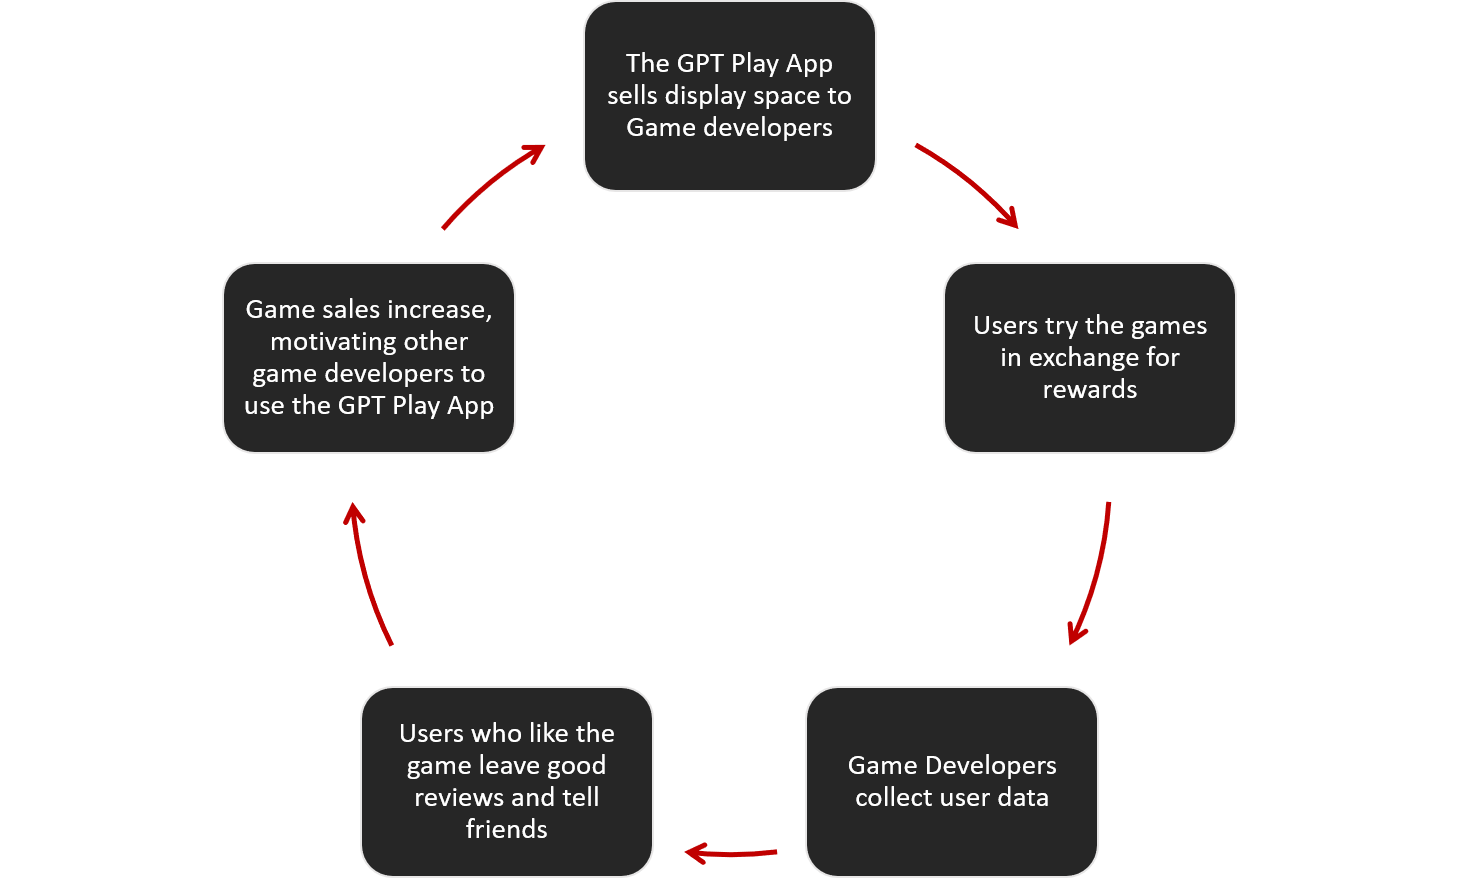 The business model of GPT-Play apps: Step 1: the GPT-Play App sells display space to game developers. Step 2: Users play the games in exchange for rewards. Step 3: Game Developers collect data from the users. Step 4: Users who like the game leave good reviews and share it with friends. Step 5: Game sales increase, motivating other developers to use the GPT App.